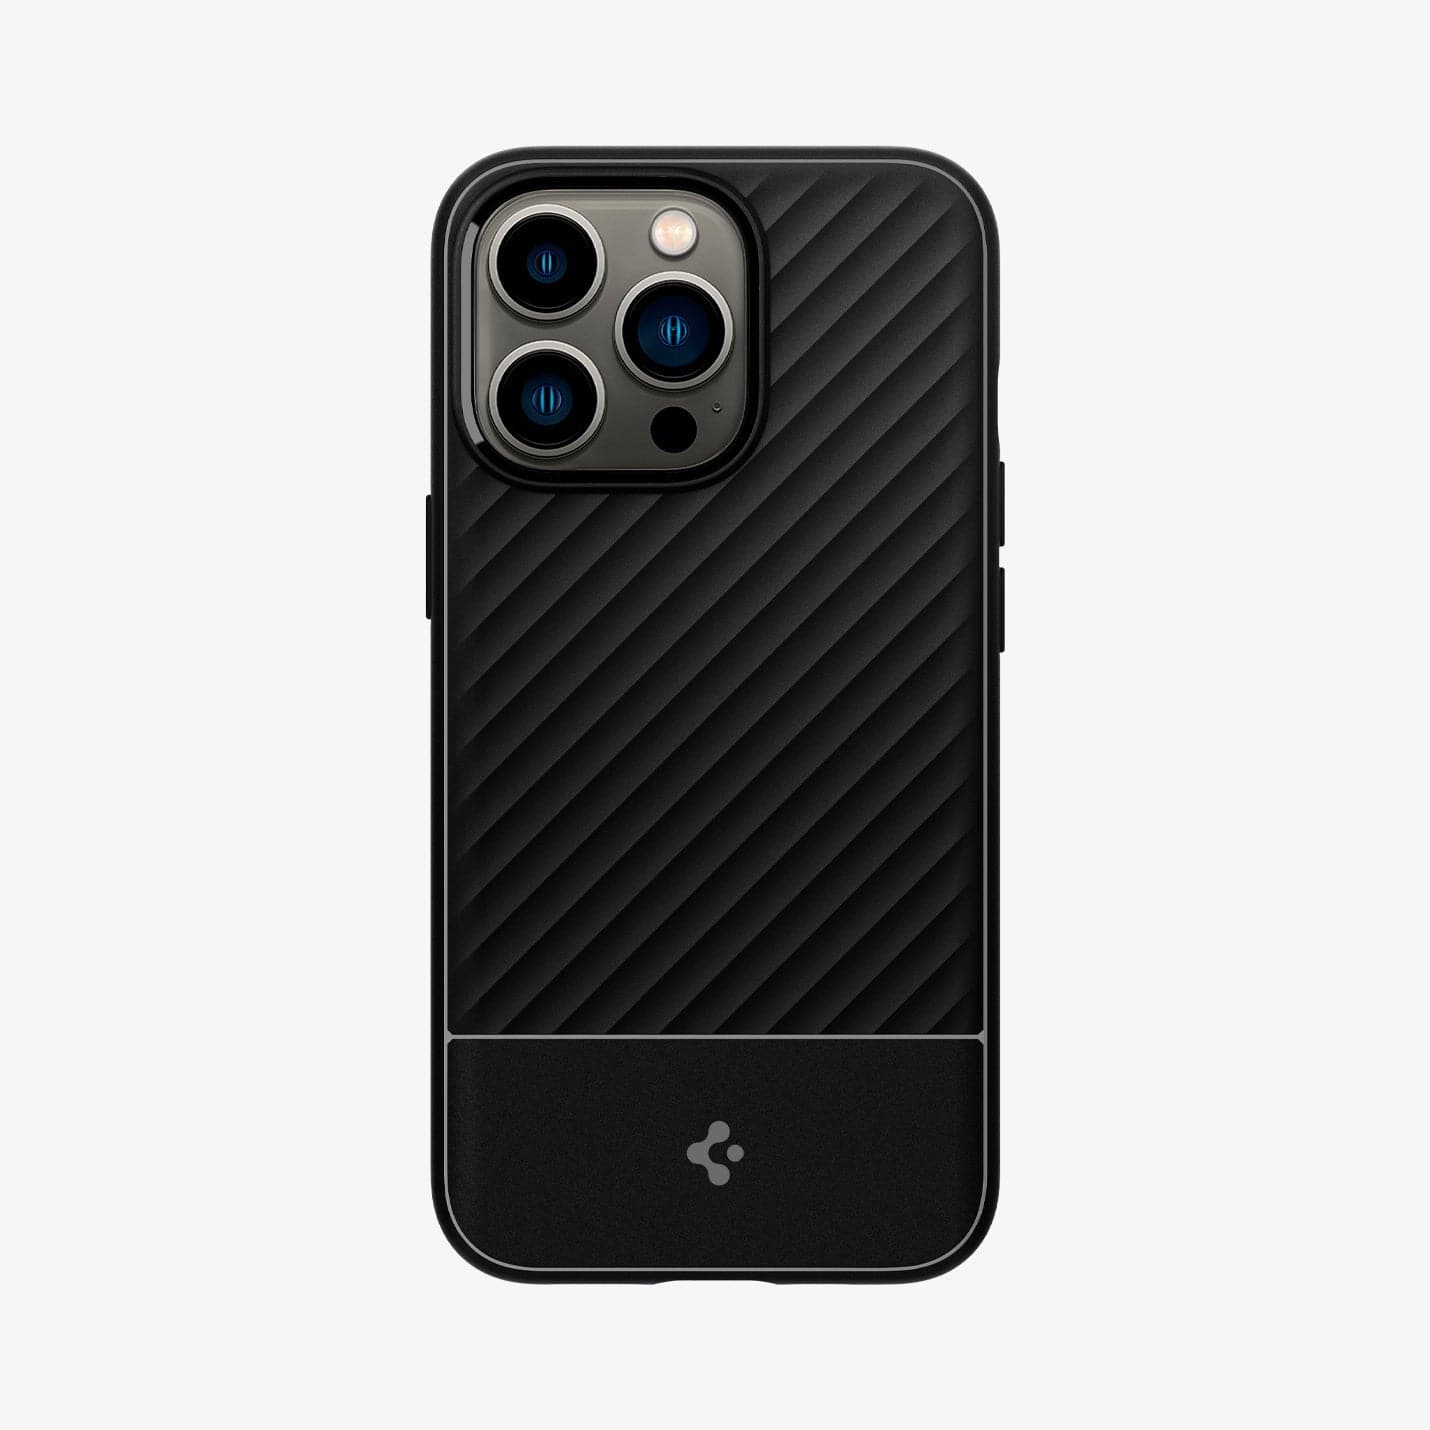 ACS03237 - iPhone 13 Pro Max Case Core Armor in black showing the back without device in case